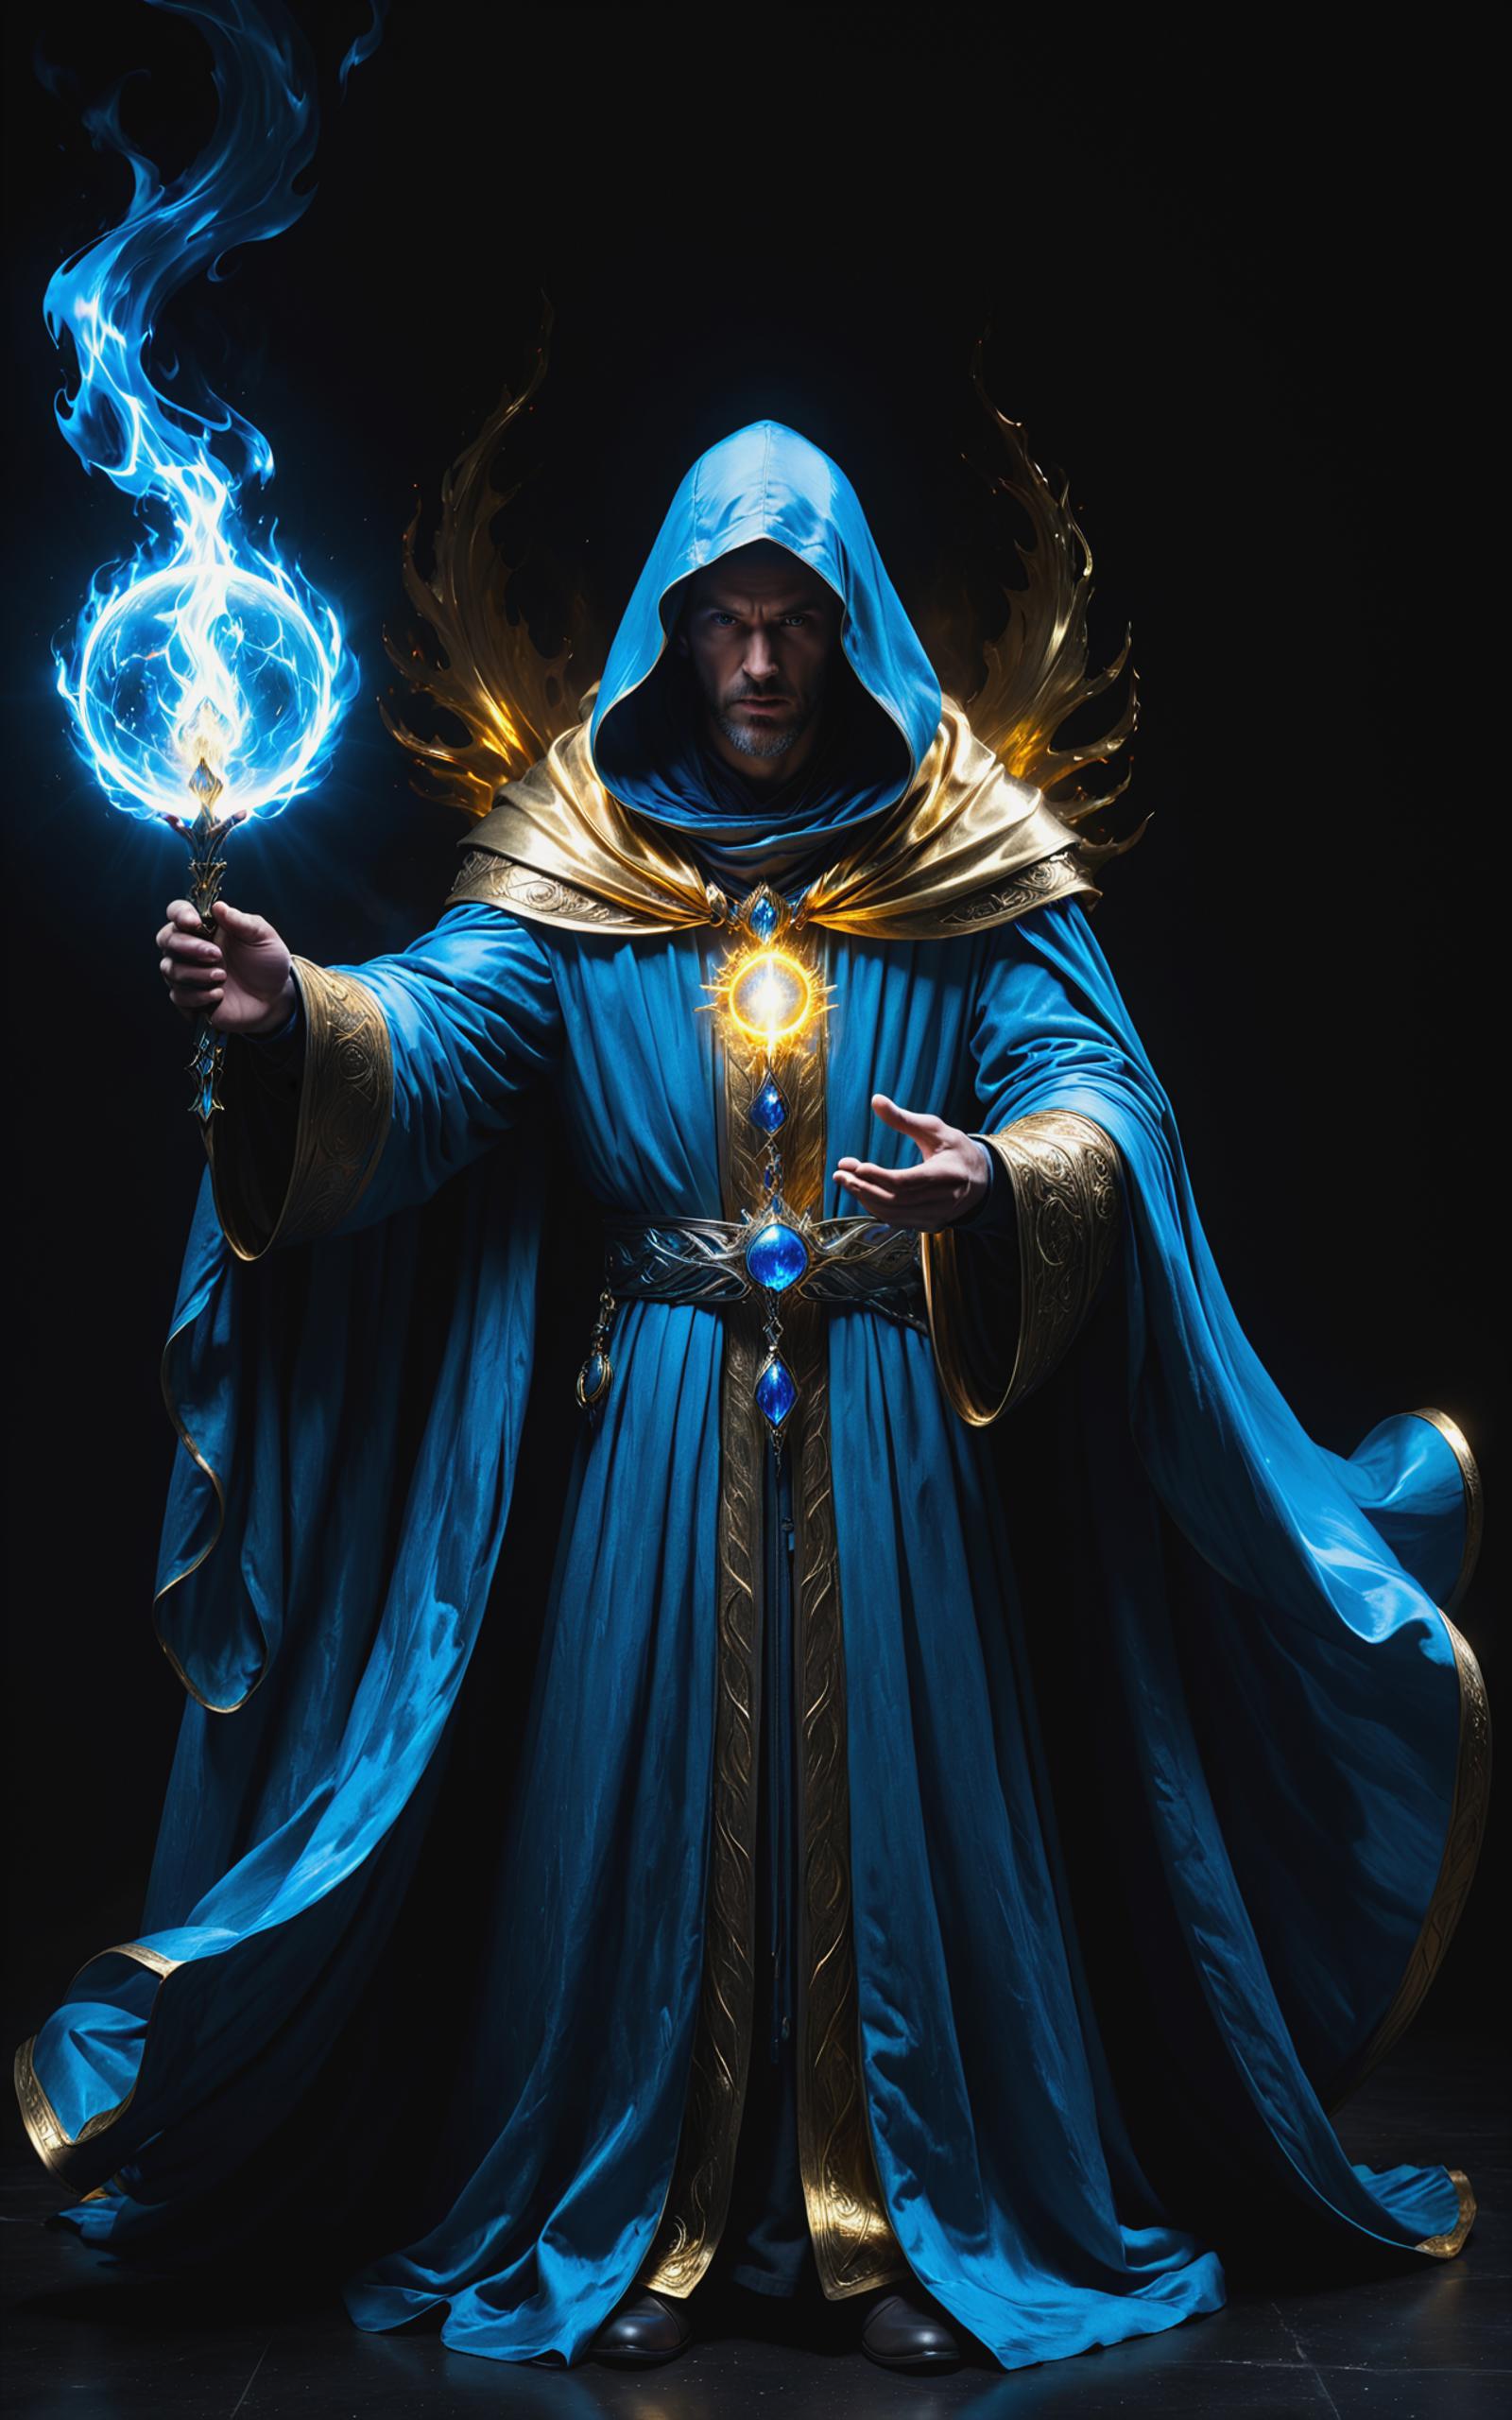 A man in a blue robe holding a wand.